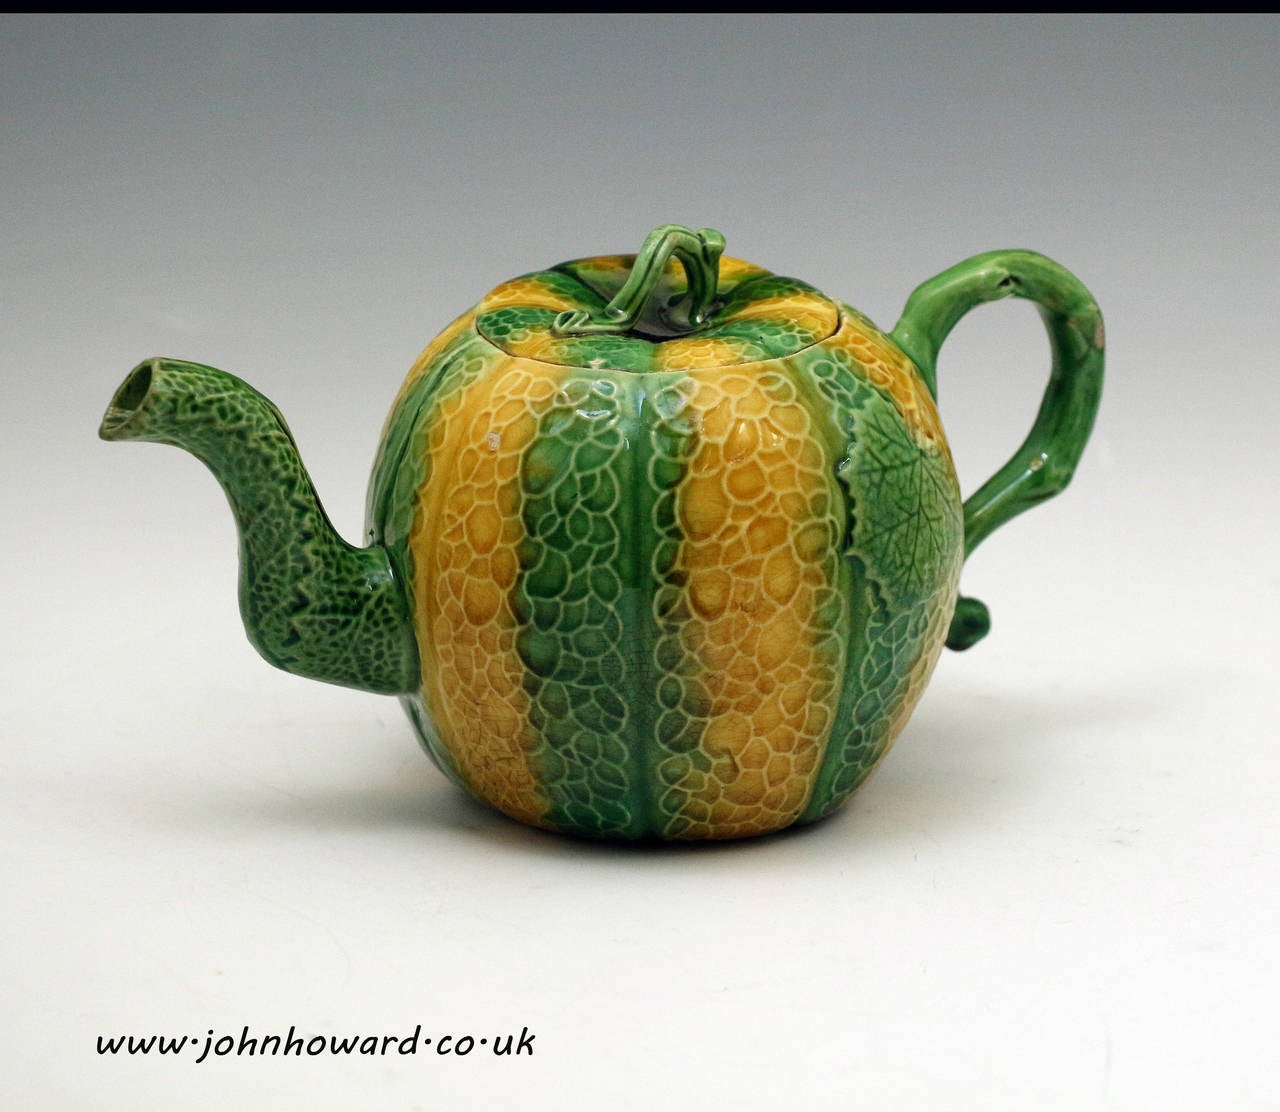 An exceptionally rare melon shaped Staffordshire pottery teapot with coloured oxide lead glaze over a finely potted creamware type body. 
This exquisite pots diminutive size reflects the expensiveness of tea in the mid 18th century.